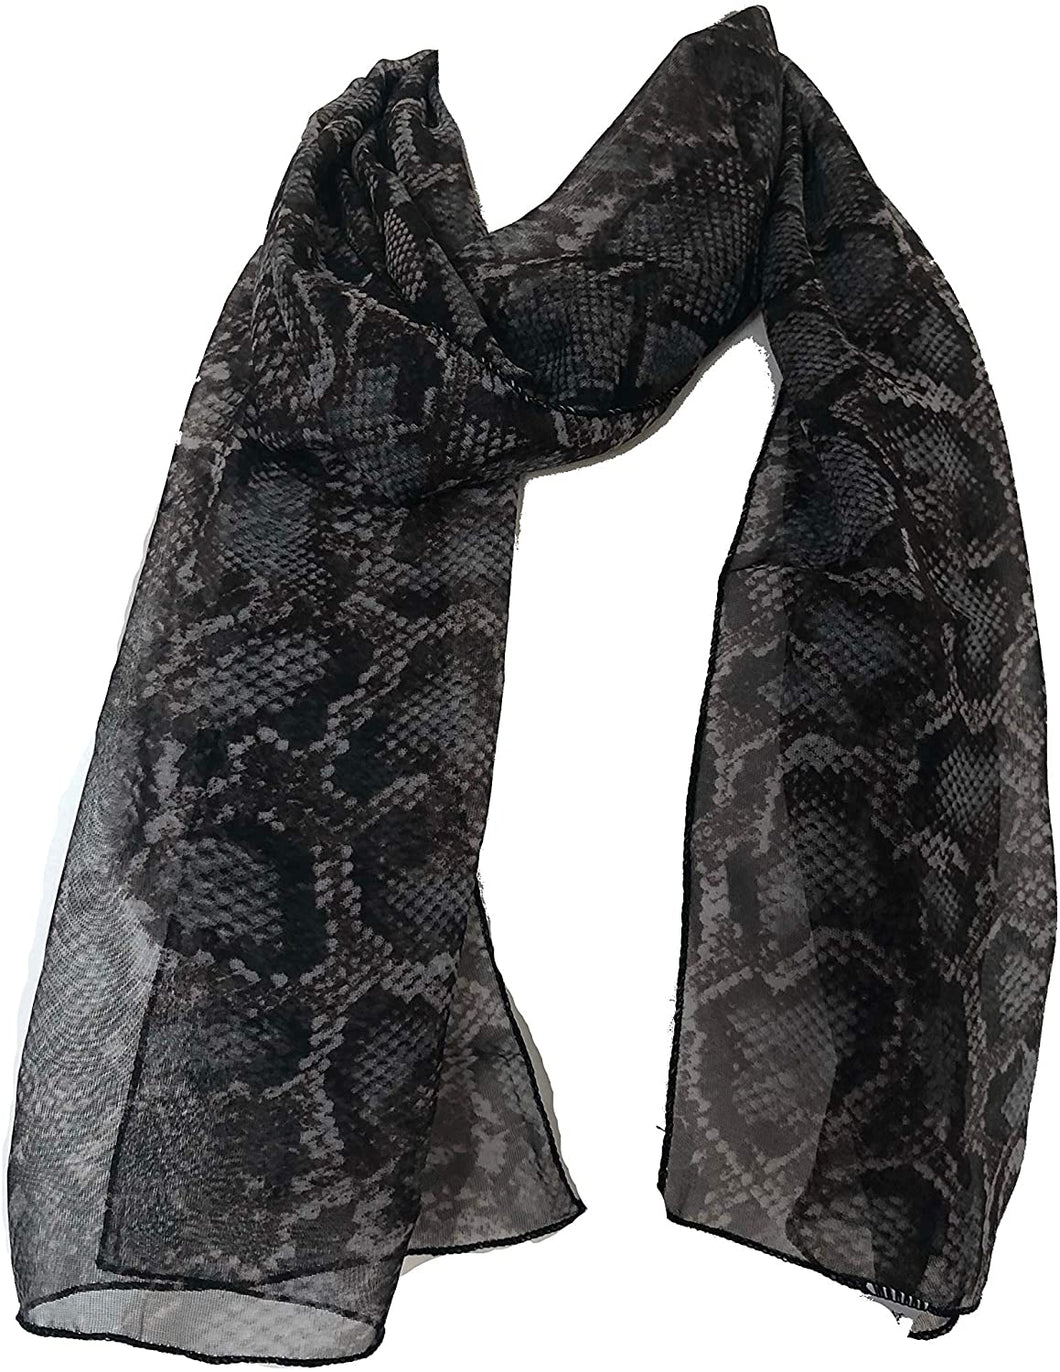 Brown/Grey Snake Skin Print Thin Chiffon Style Pretty Scarf Great for Any Outfit Lovely Gift